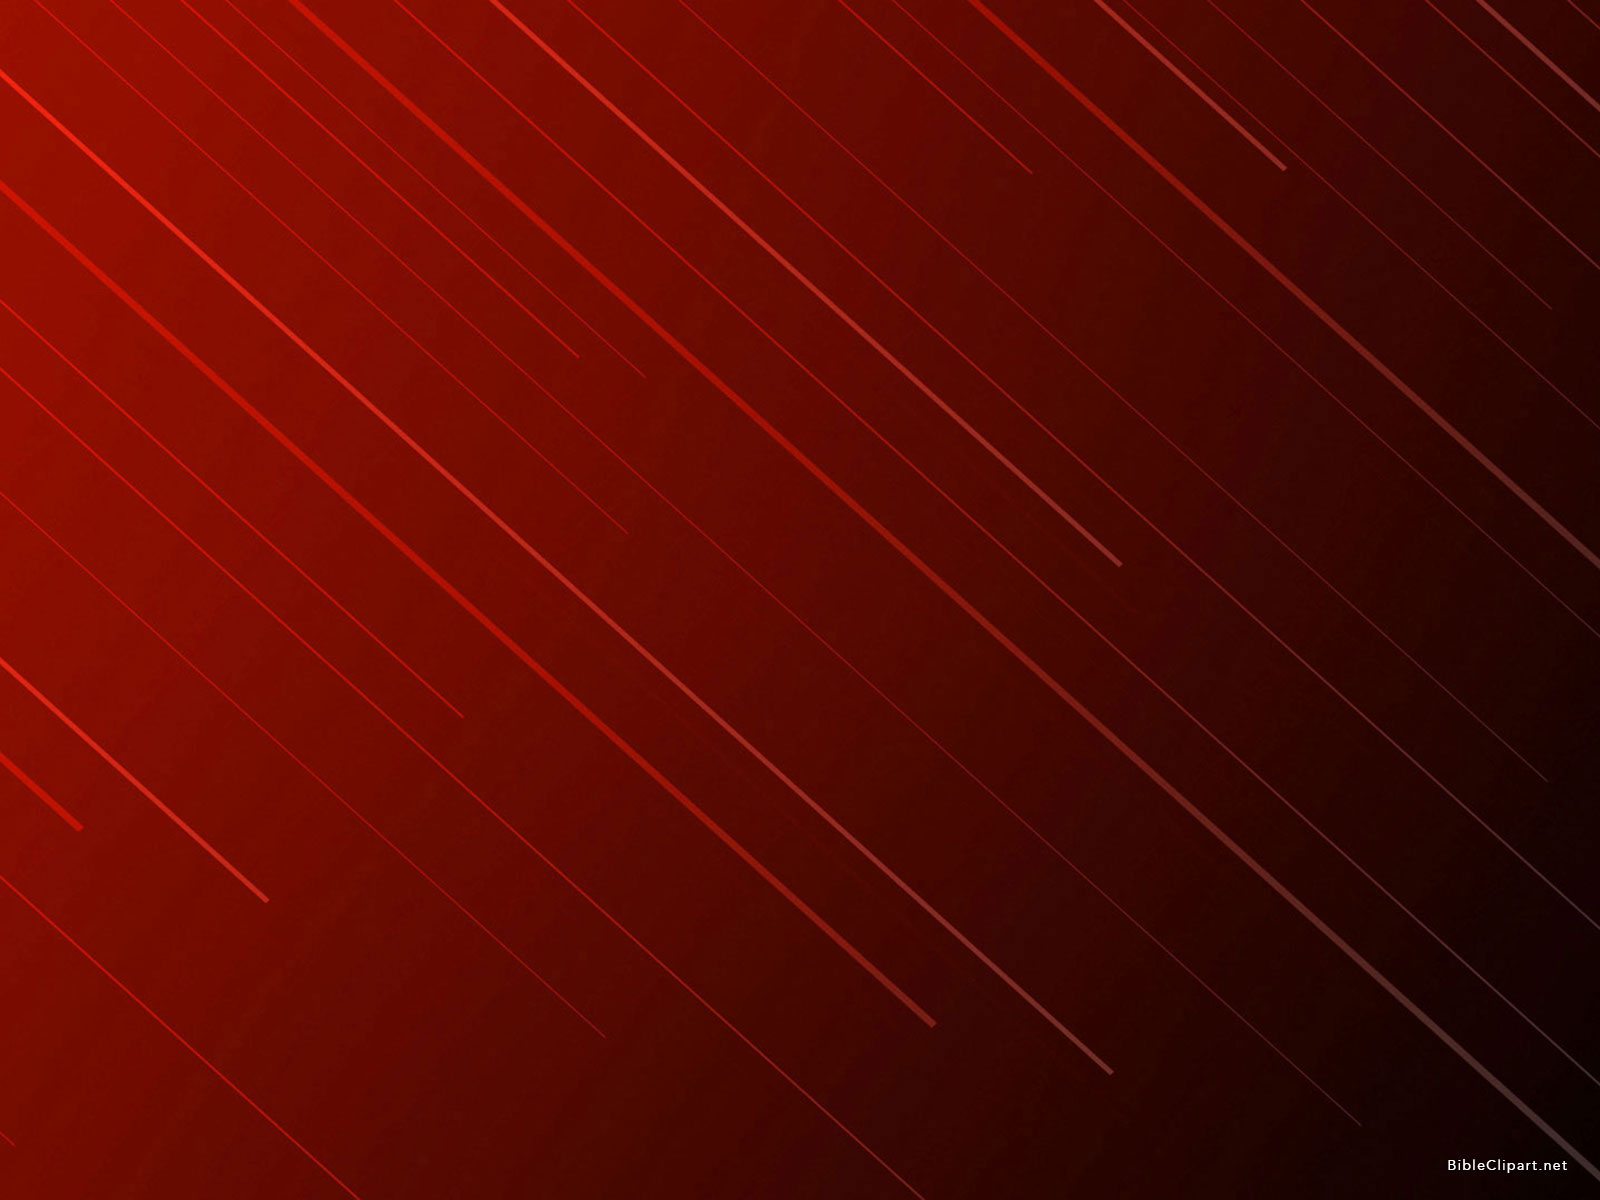 Red Stripe Background   Bible Clipart